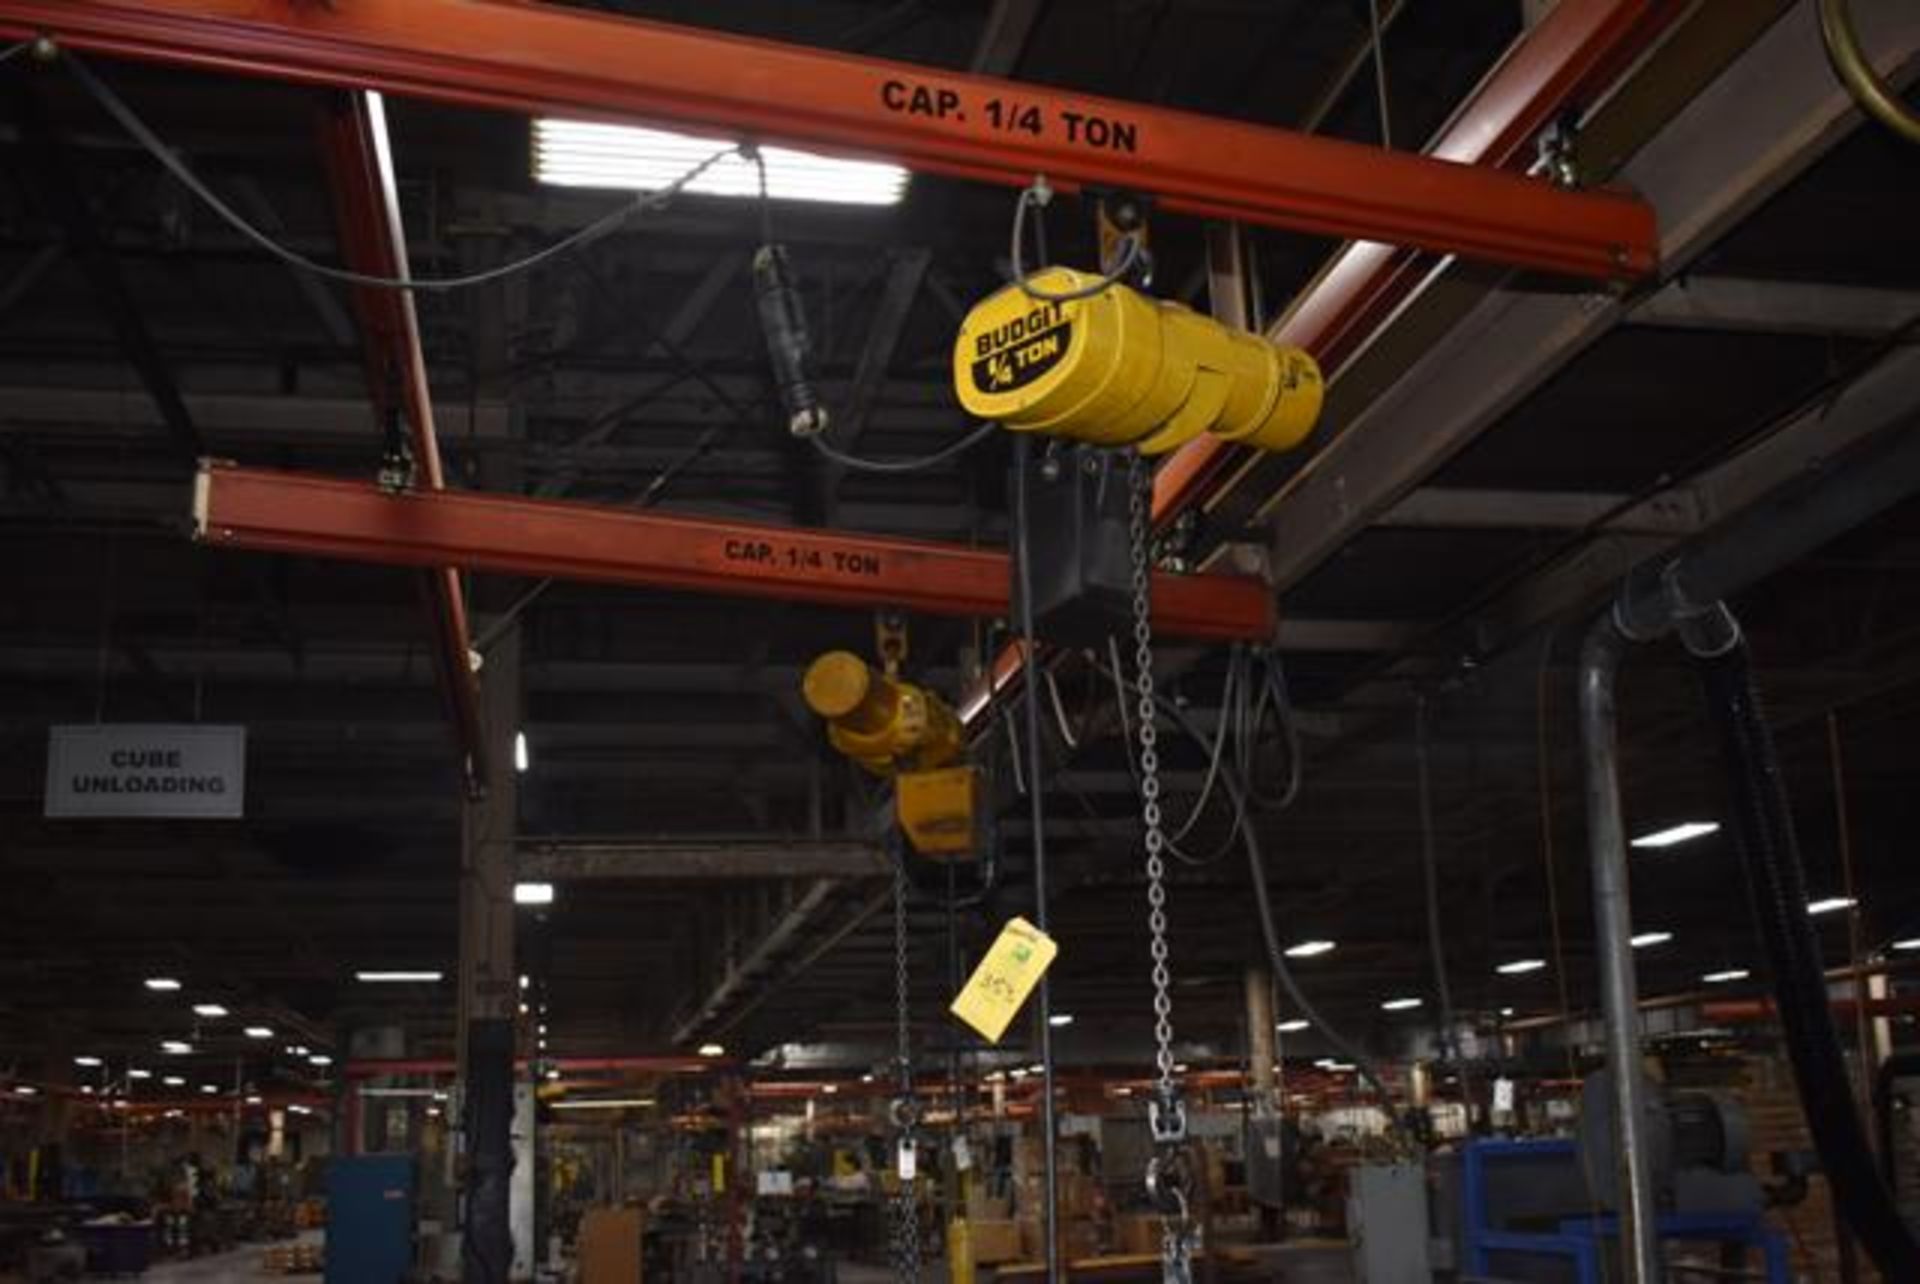 Demag Overhead Crane System Suspended from Ceiling, Approx. 12' Span x 30' Floor Space,2 Masts w/